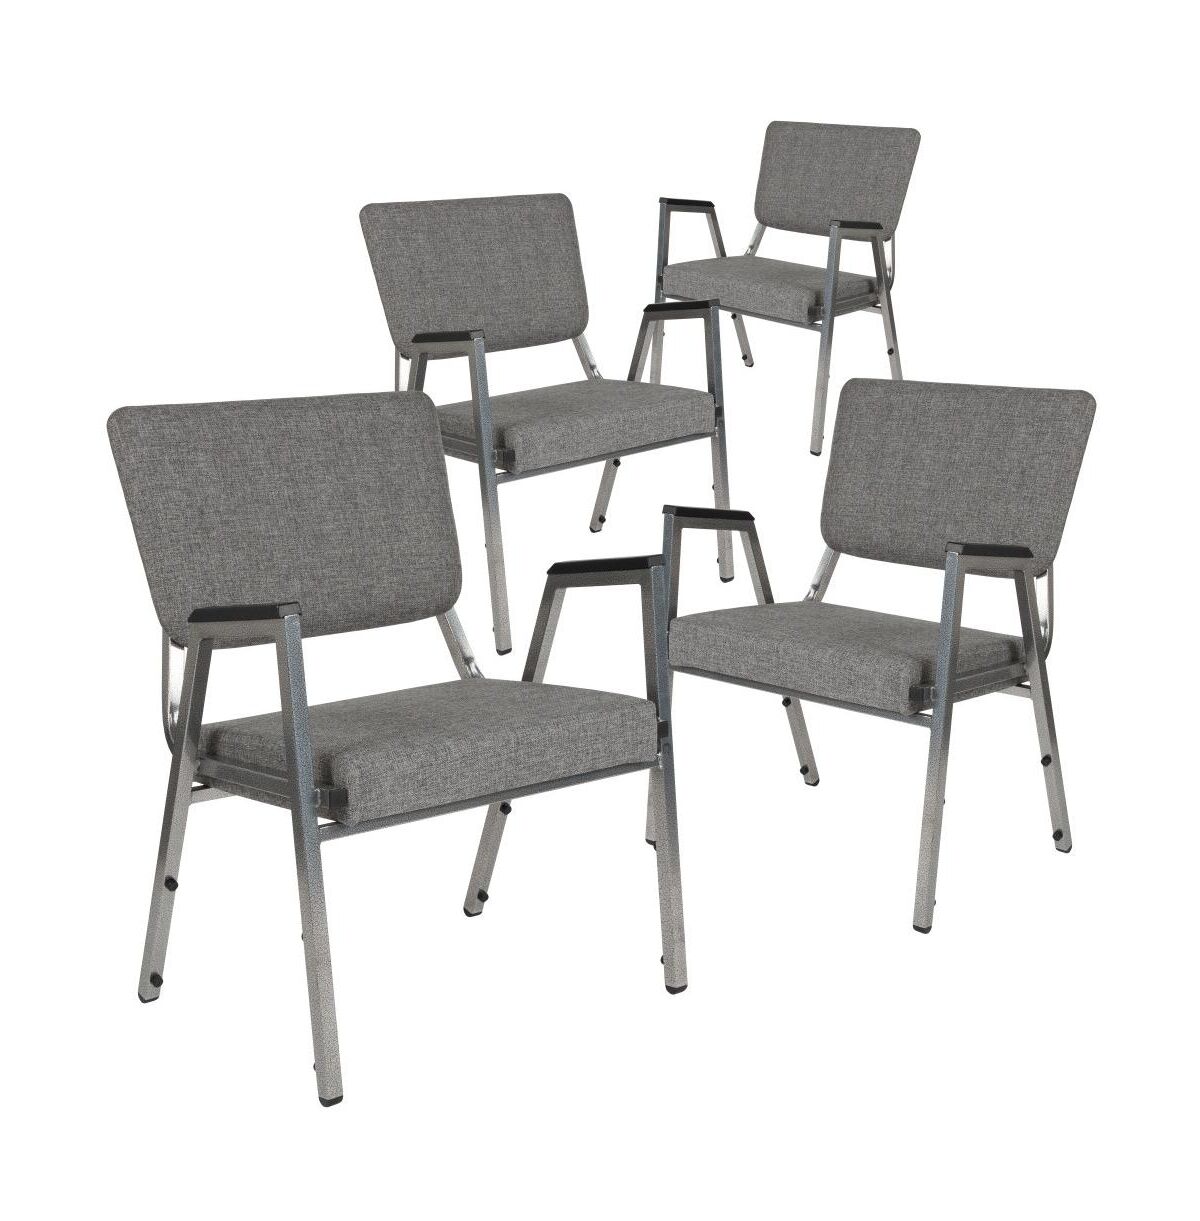 Emma+oliver 4 Pack 1000 Lb. Rated Antimicrobial Bariatric Medical Reception Arm Chair With Panel Back - Gray fabric